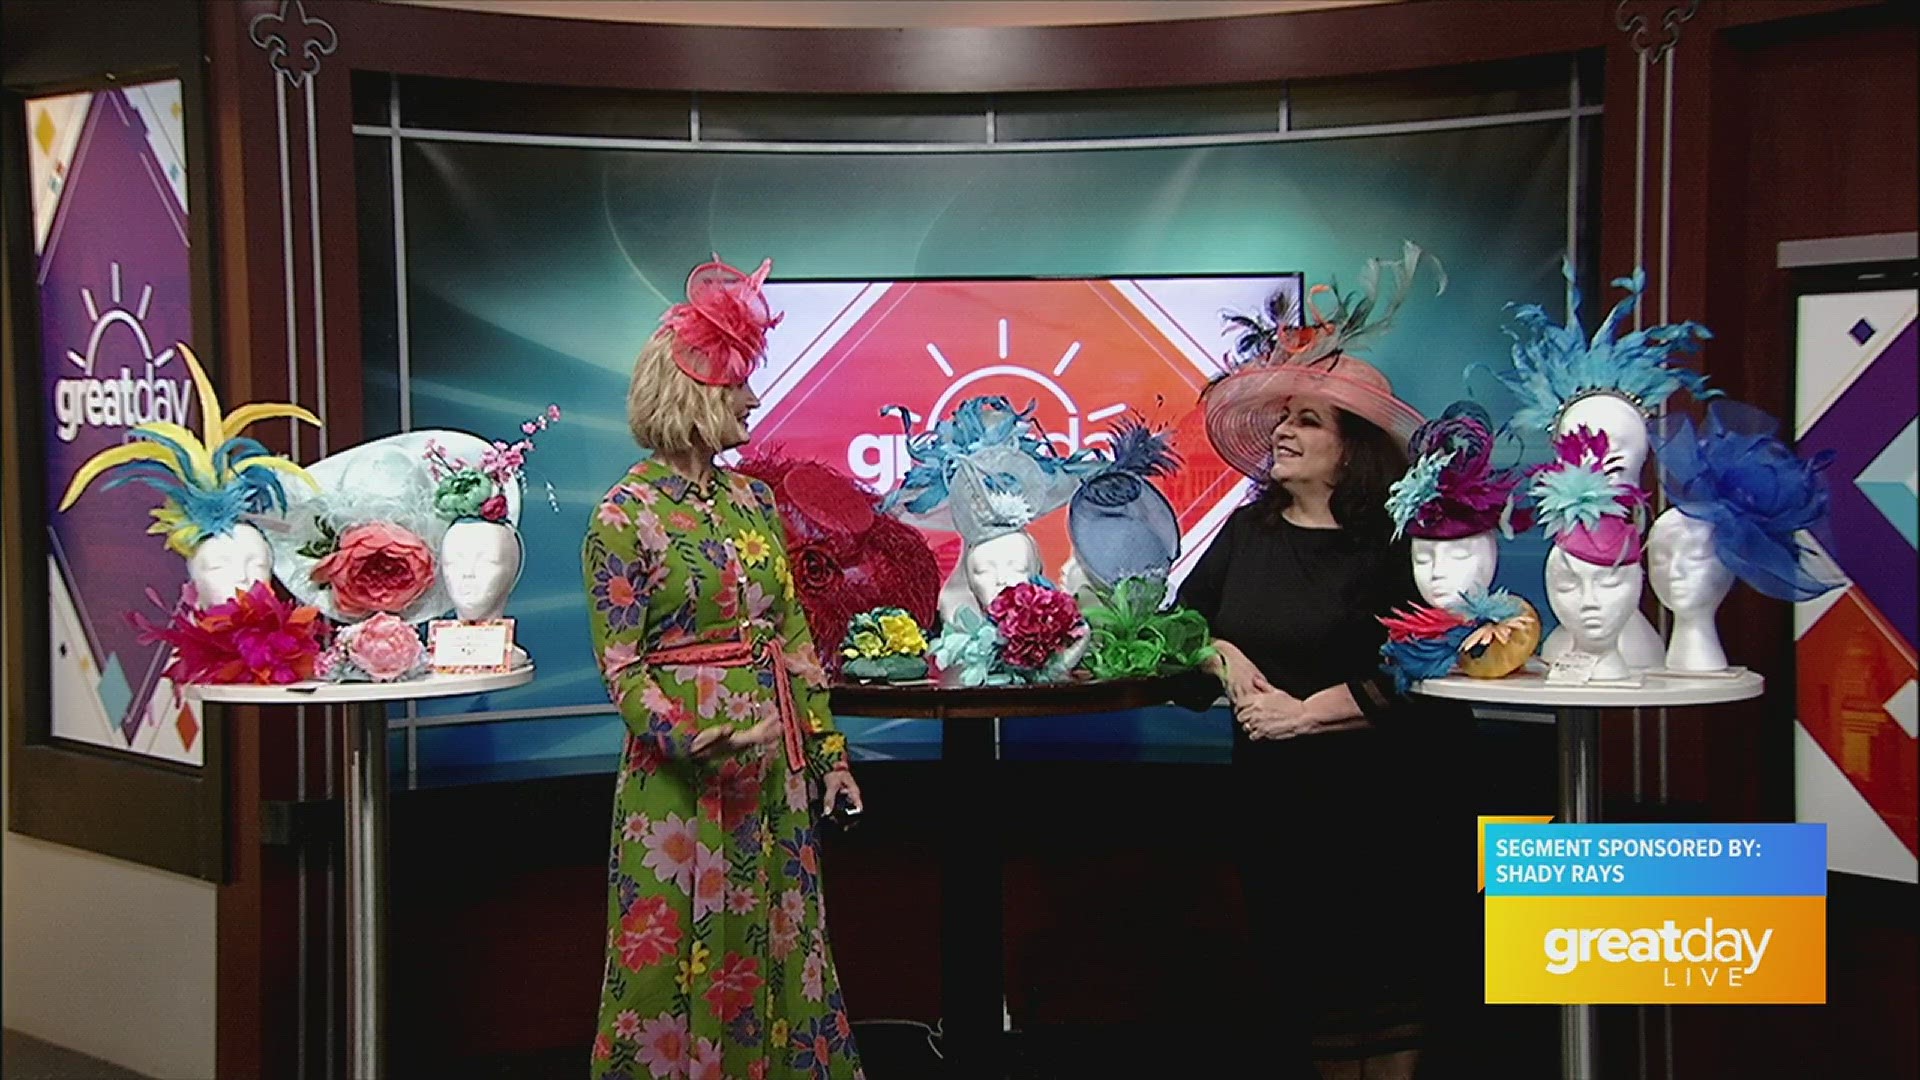 Hats Off by Helen has the perfect hats for your Derby Outfit!